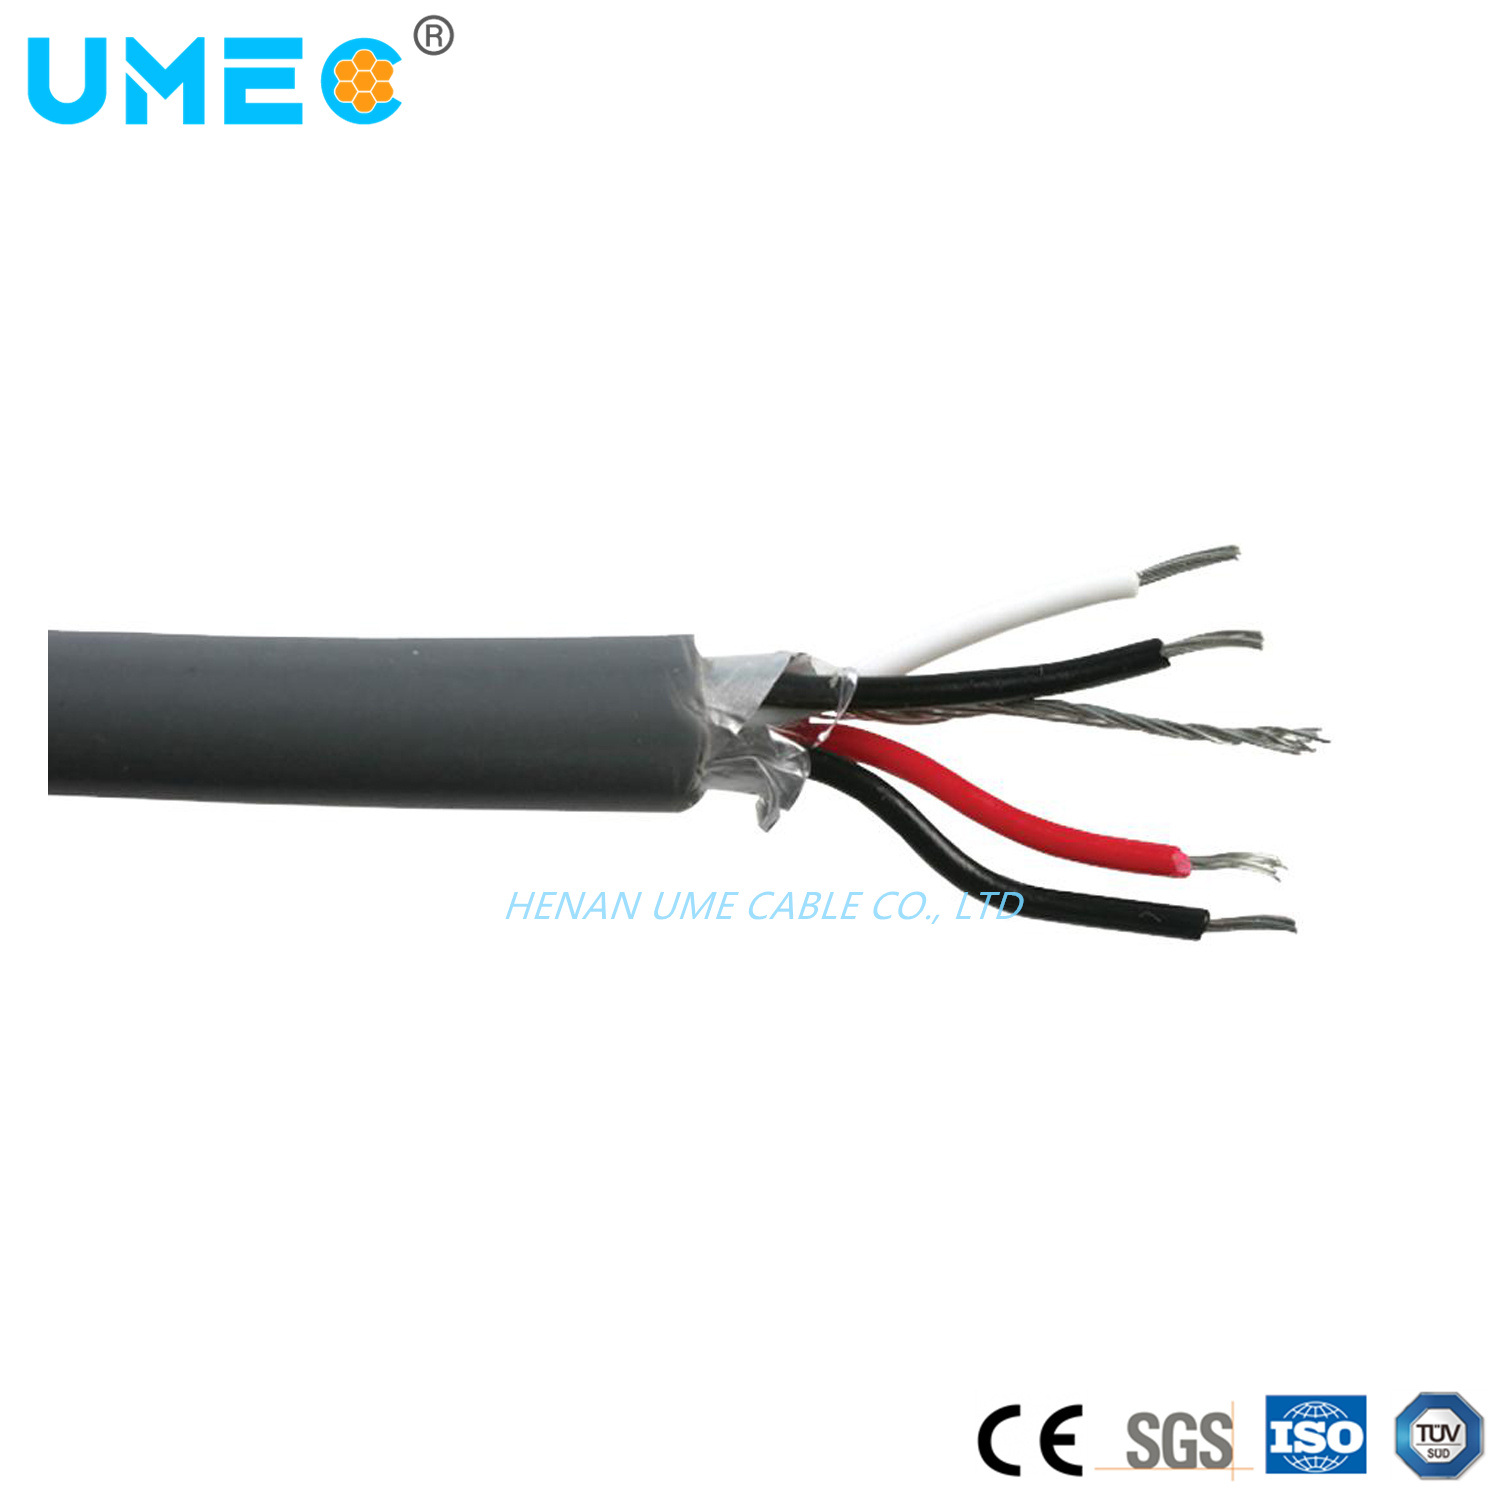 Factory Price China Supplier Power Cable Computer Cable Household Electrical Cable Computer Cable